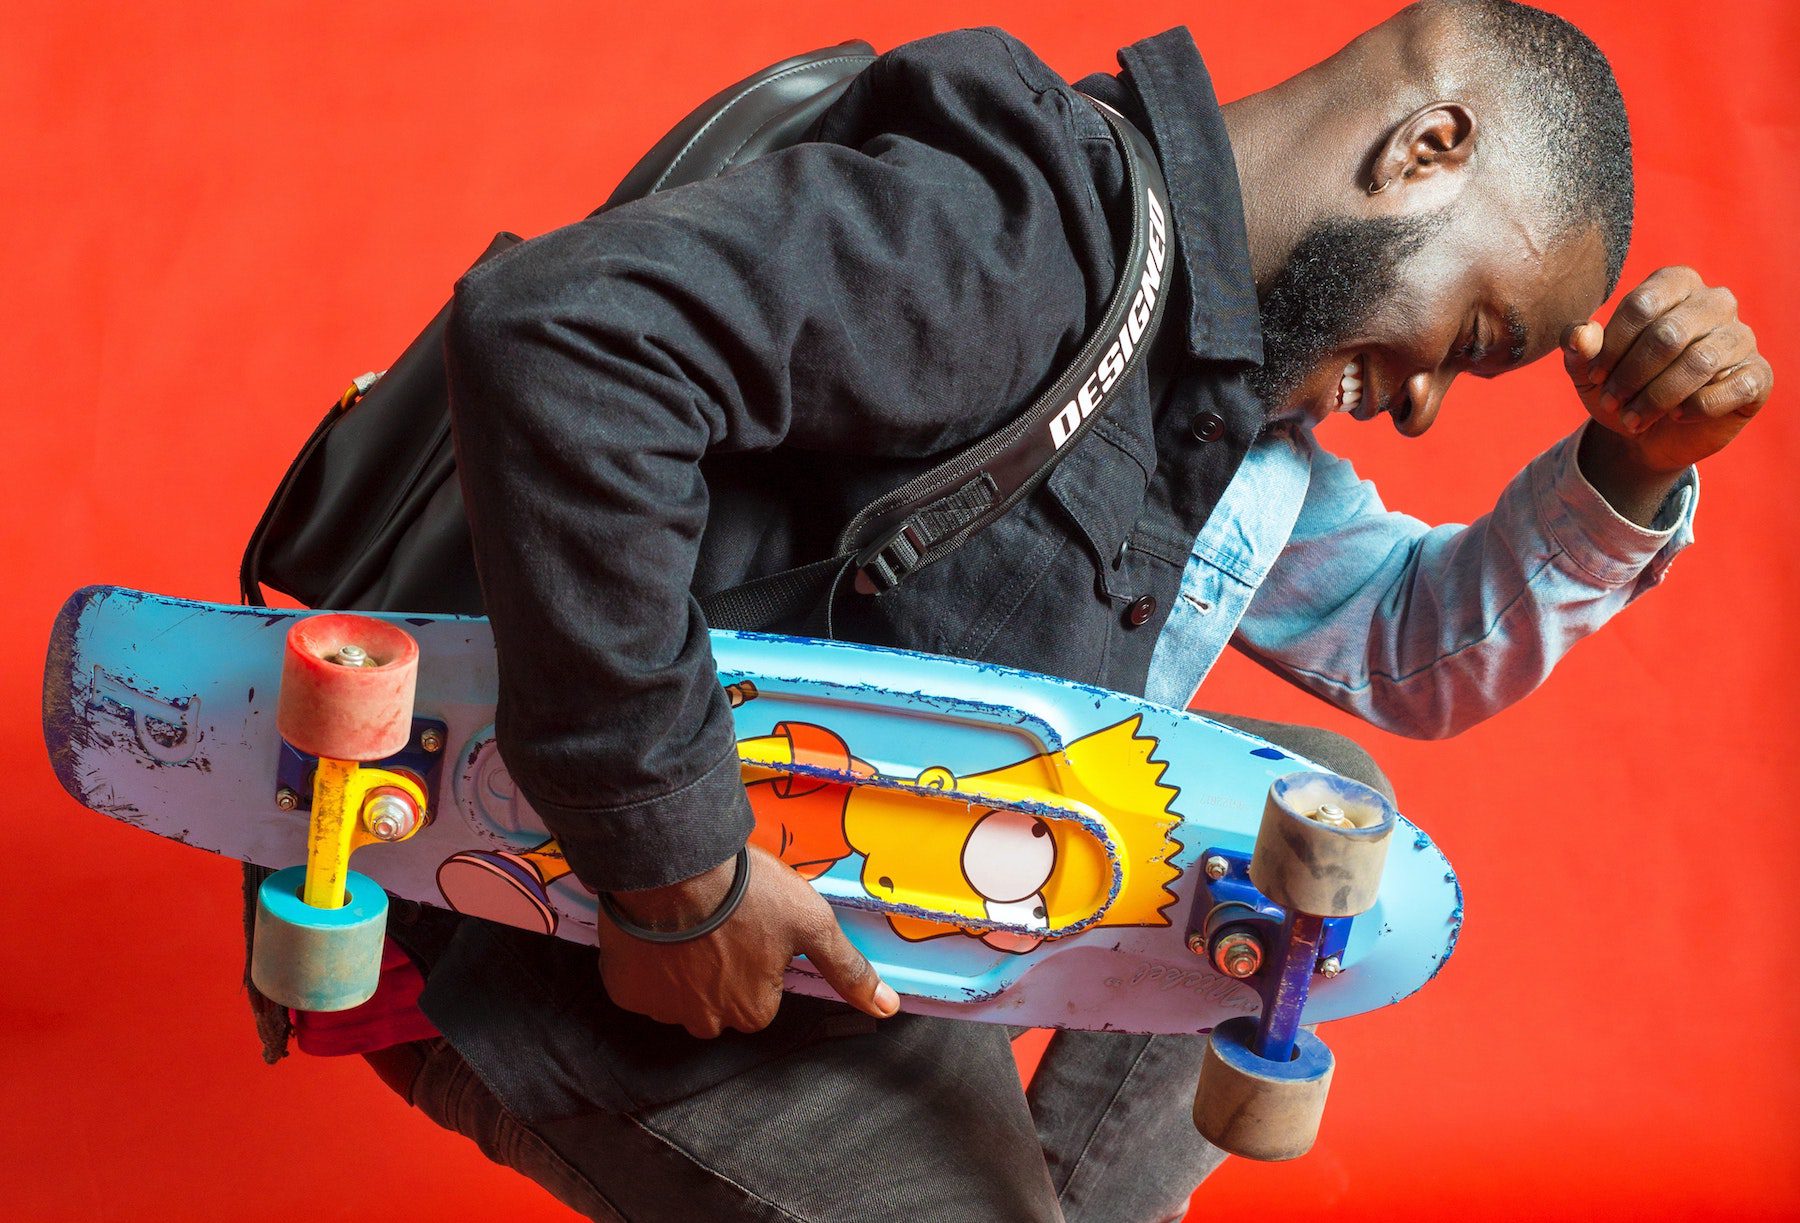 Young man holding a skateboard with Bart painted on the deck against a bright red-orange background.